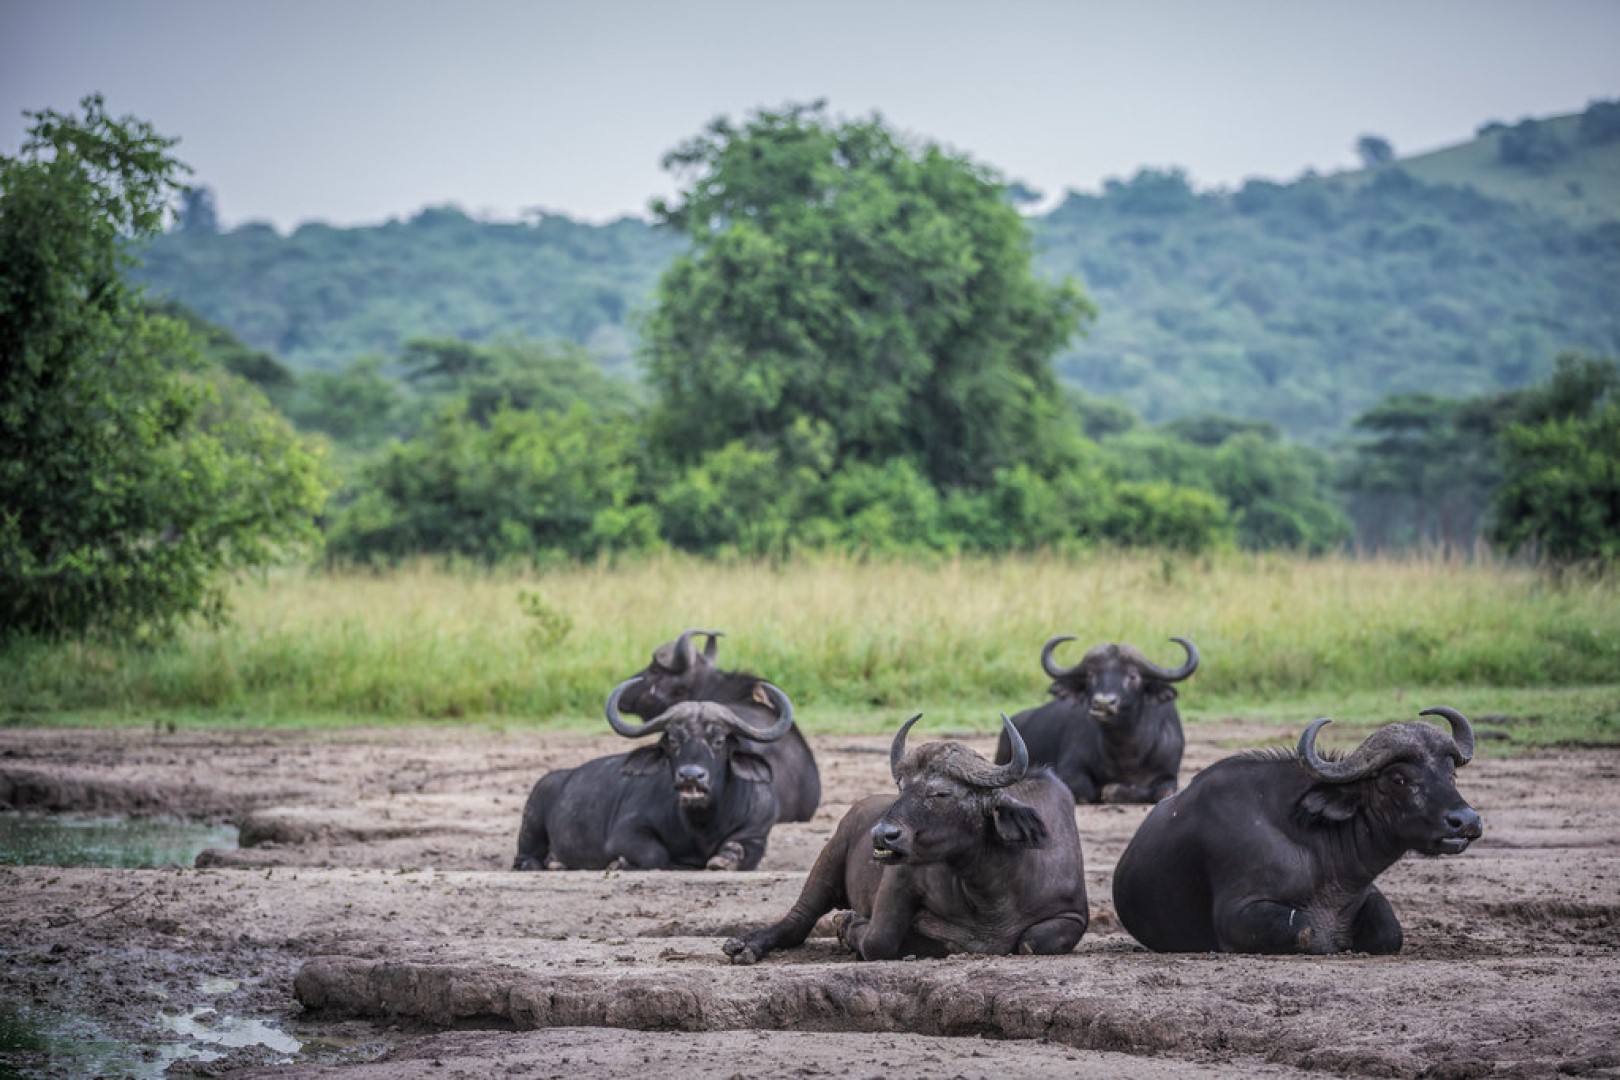 Relaxing buffaloes in Kibale National Park